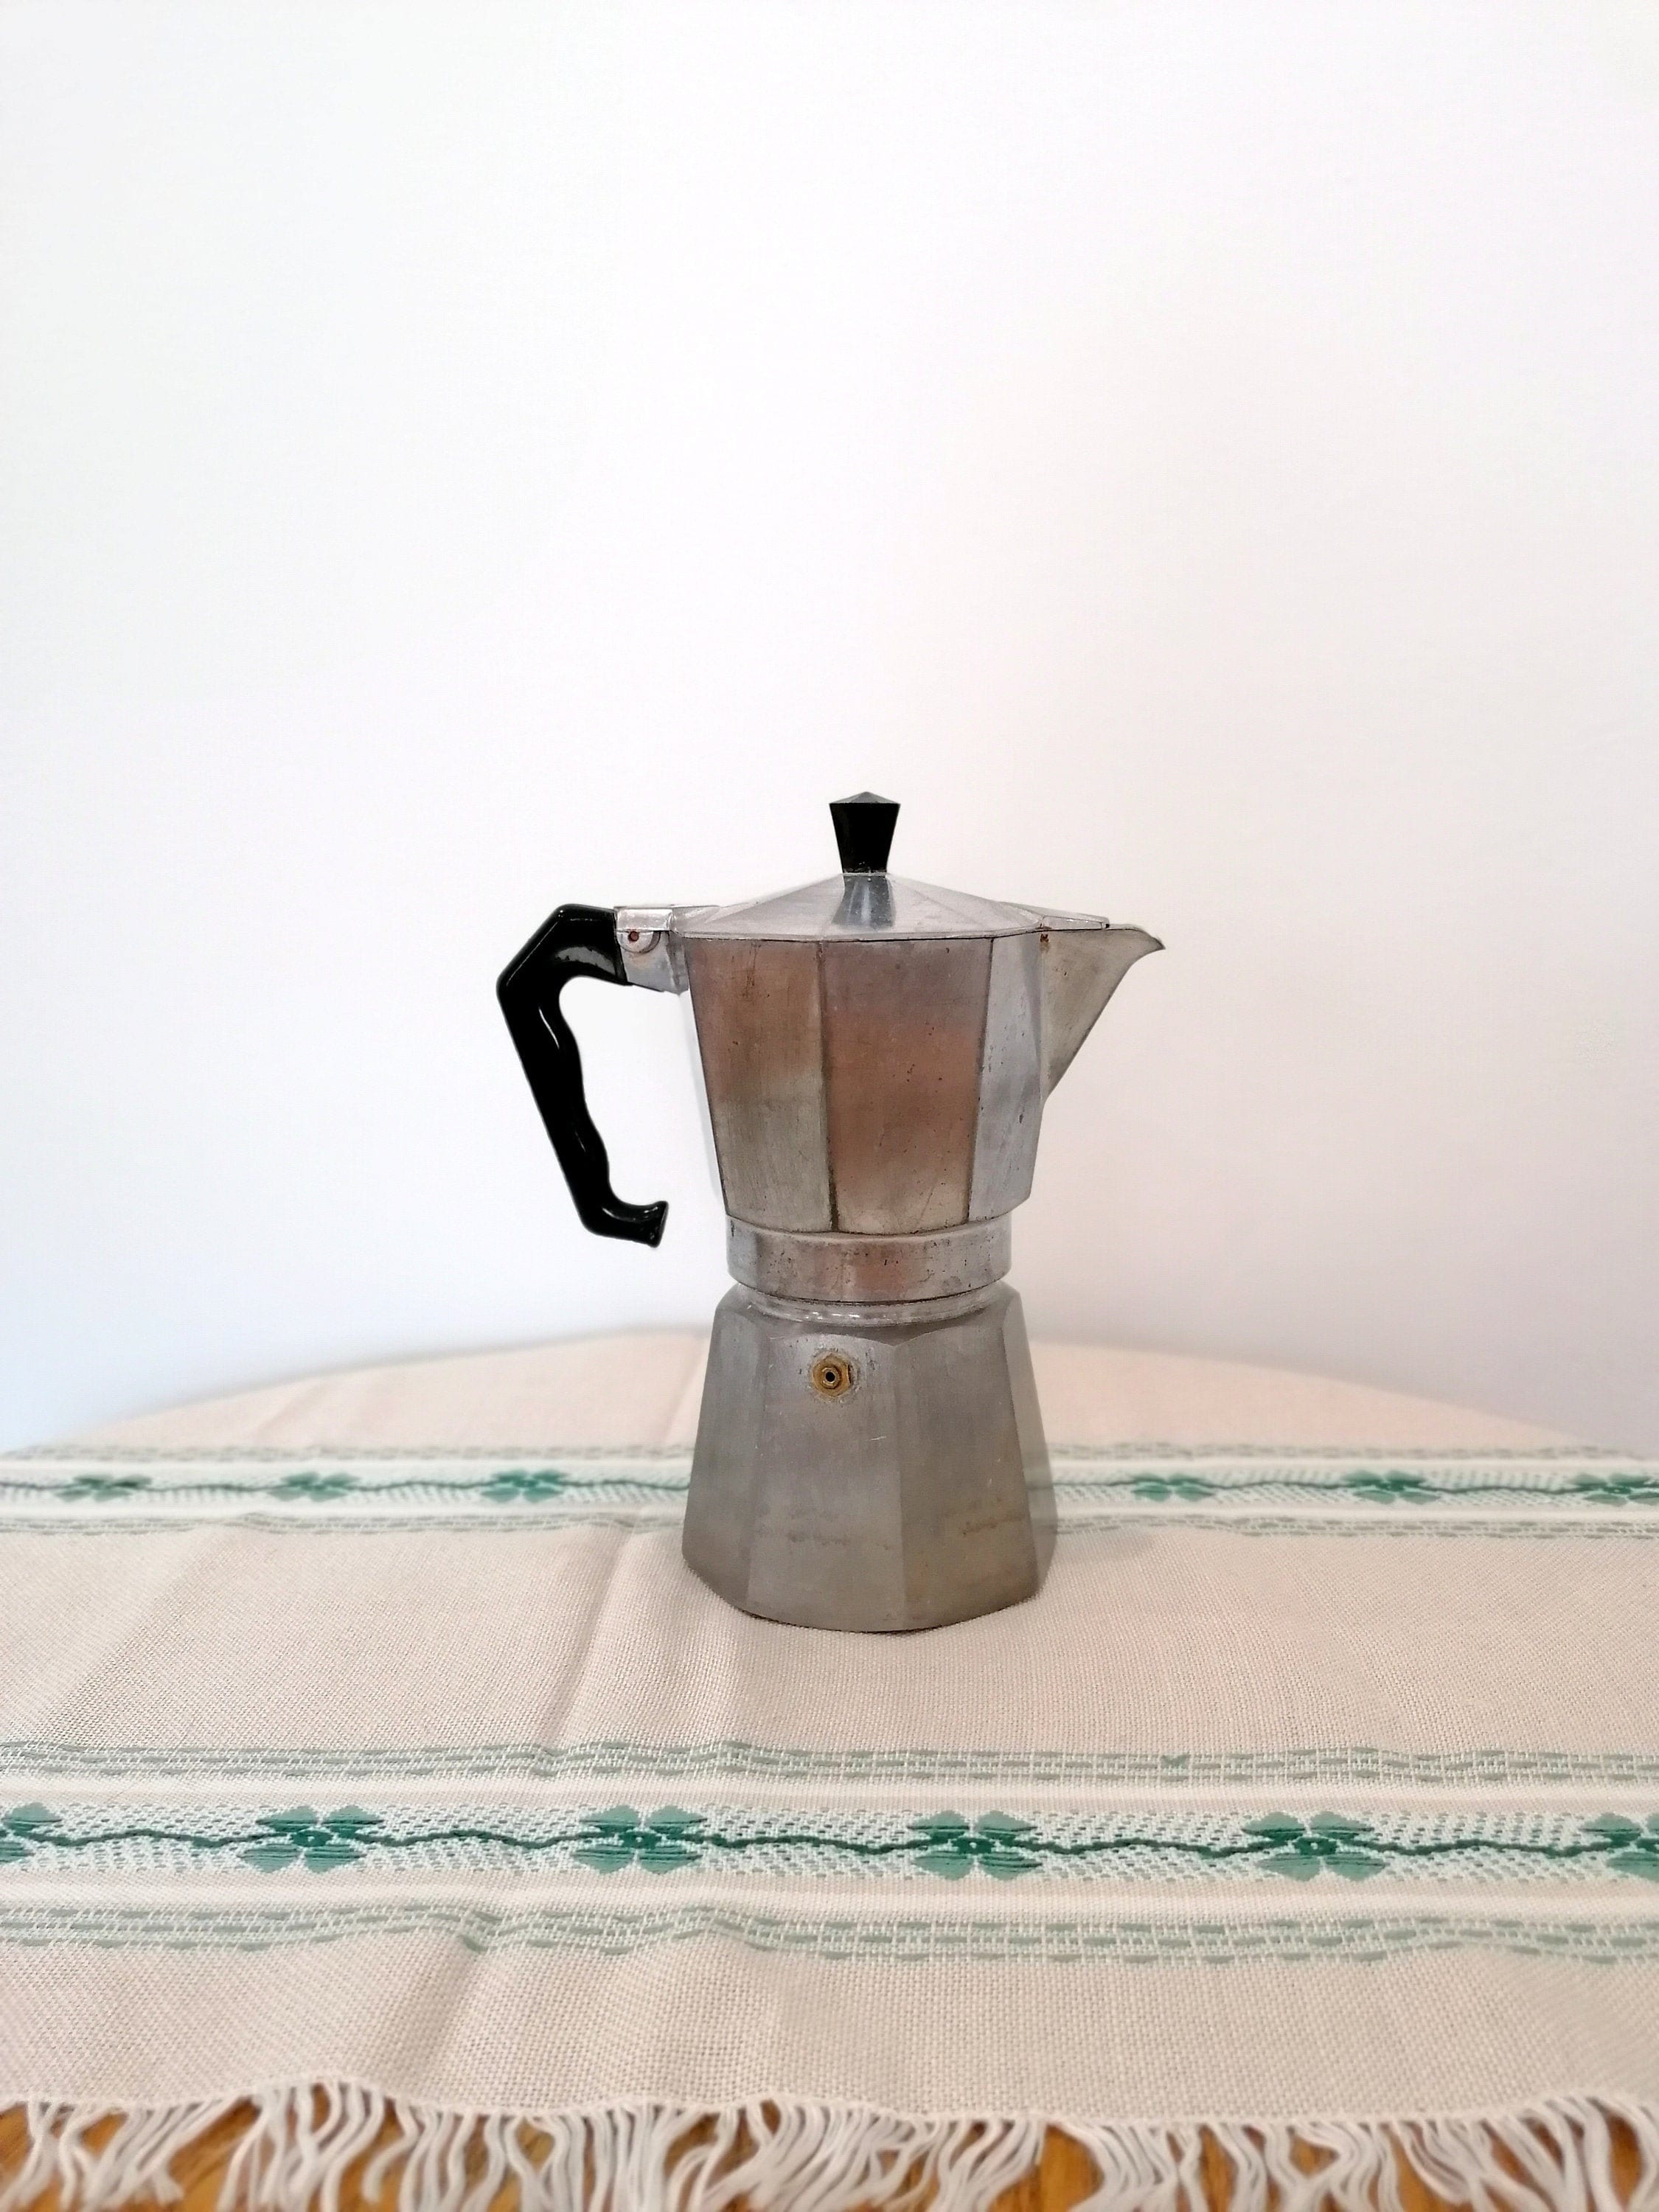 Antique Coffee Maker Made IN Italy Mocha Express Junior Express 3 Vintage